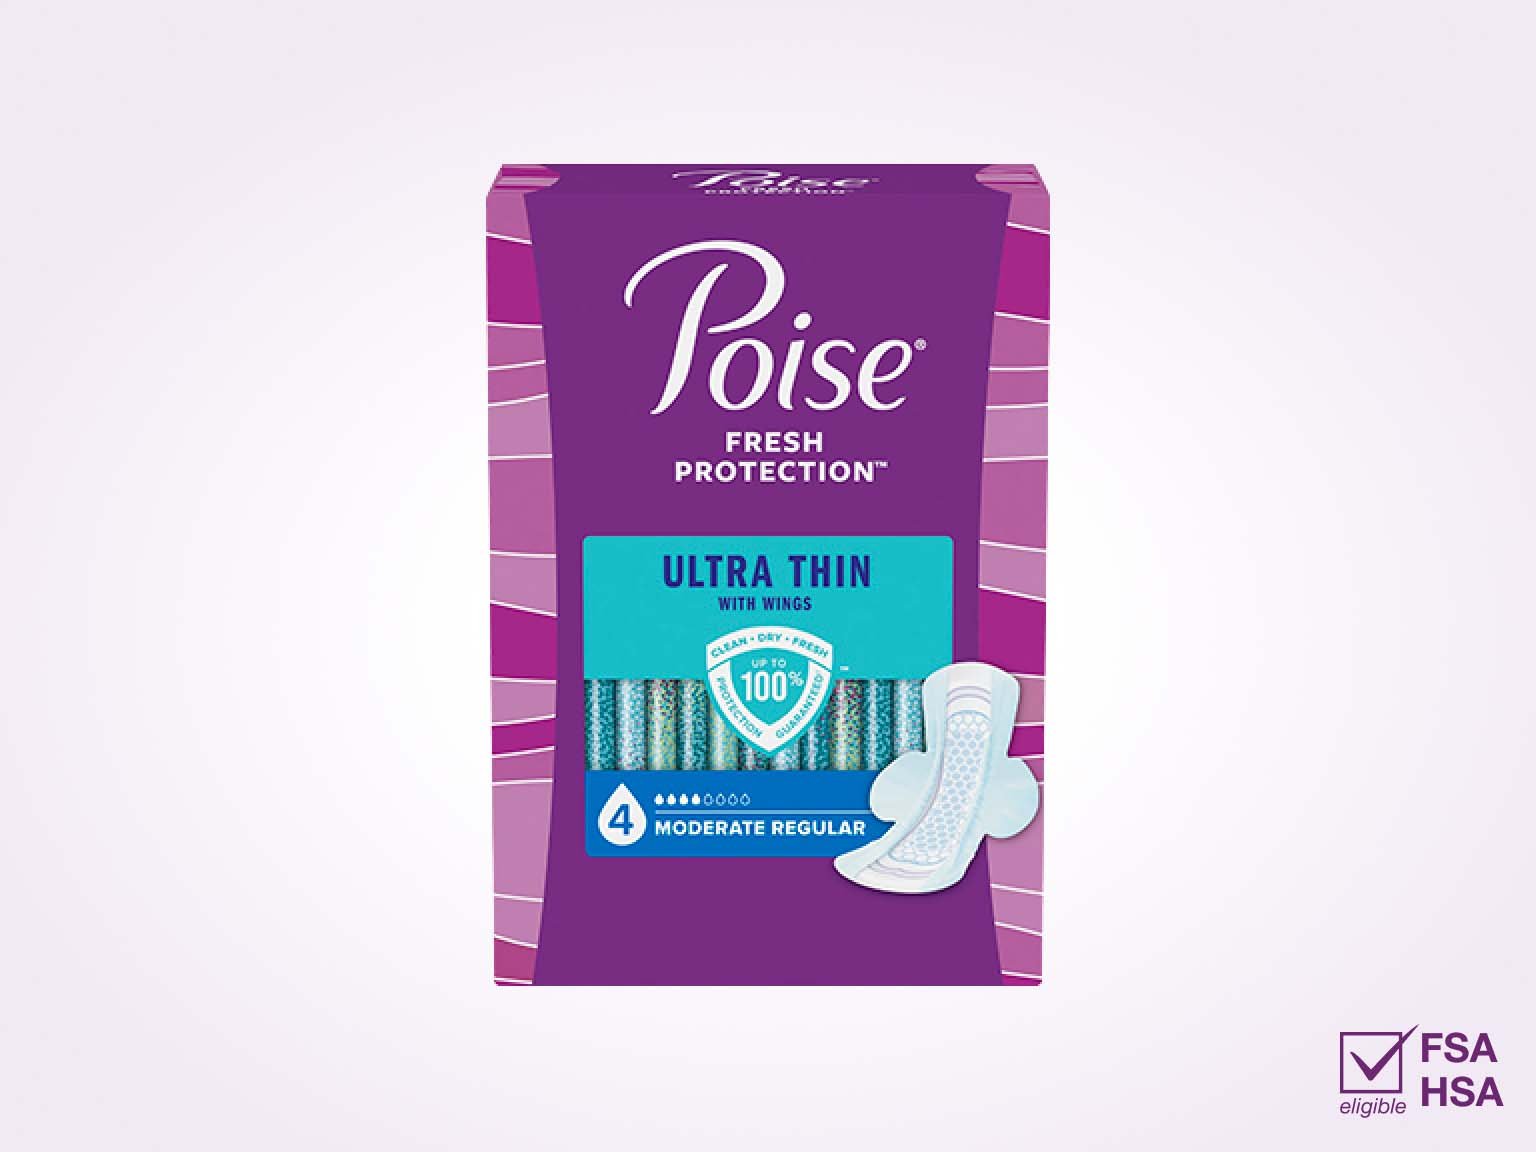 https://www.poise.com/-/media/feature/poise/na/us/product/plp/product/desktop/ultra-thin---with-wings-4-drop-moderate-regular-length.jpg?rev=85d52c5989fe4ac9bf849451a8a3f870